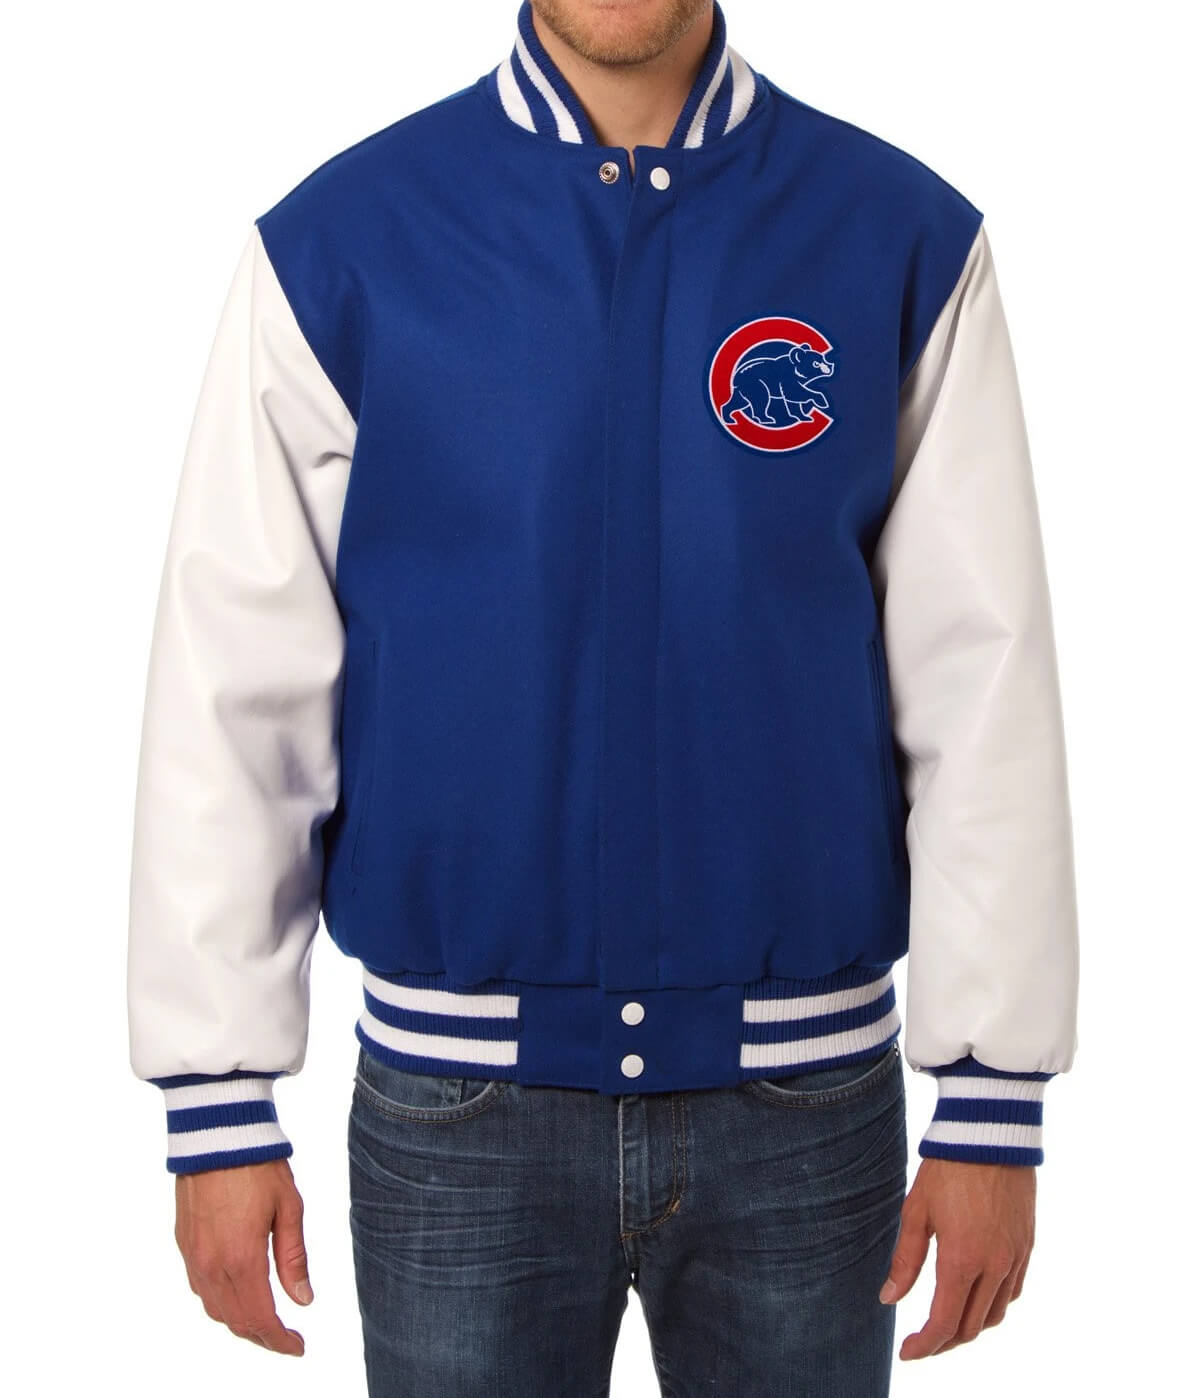 Maker of Jacket MLB Chicago Cubs Two Tone Wool and Leather